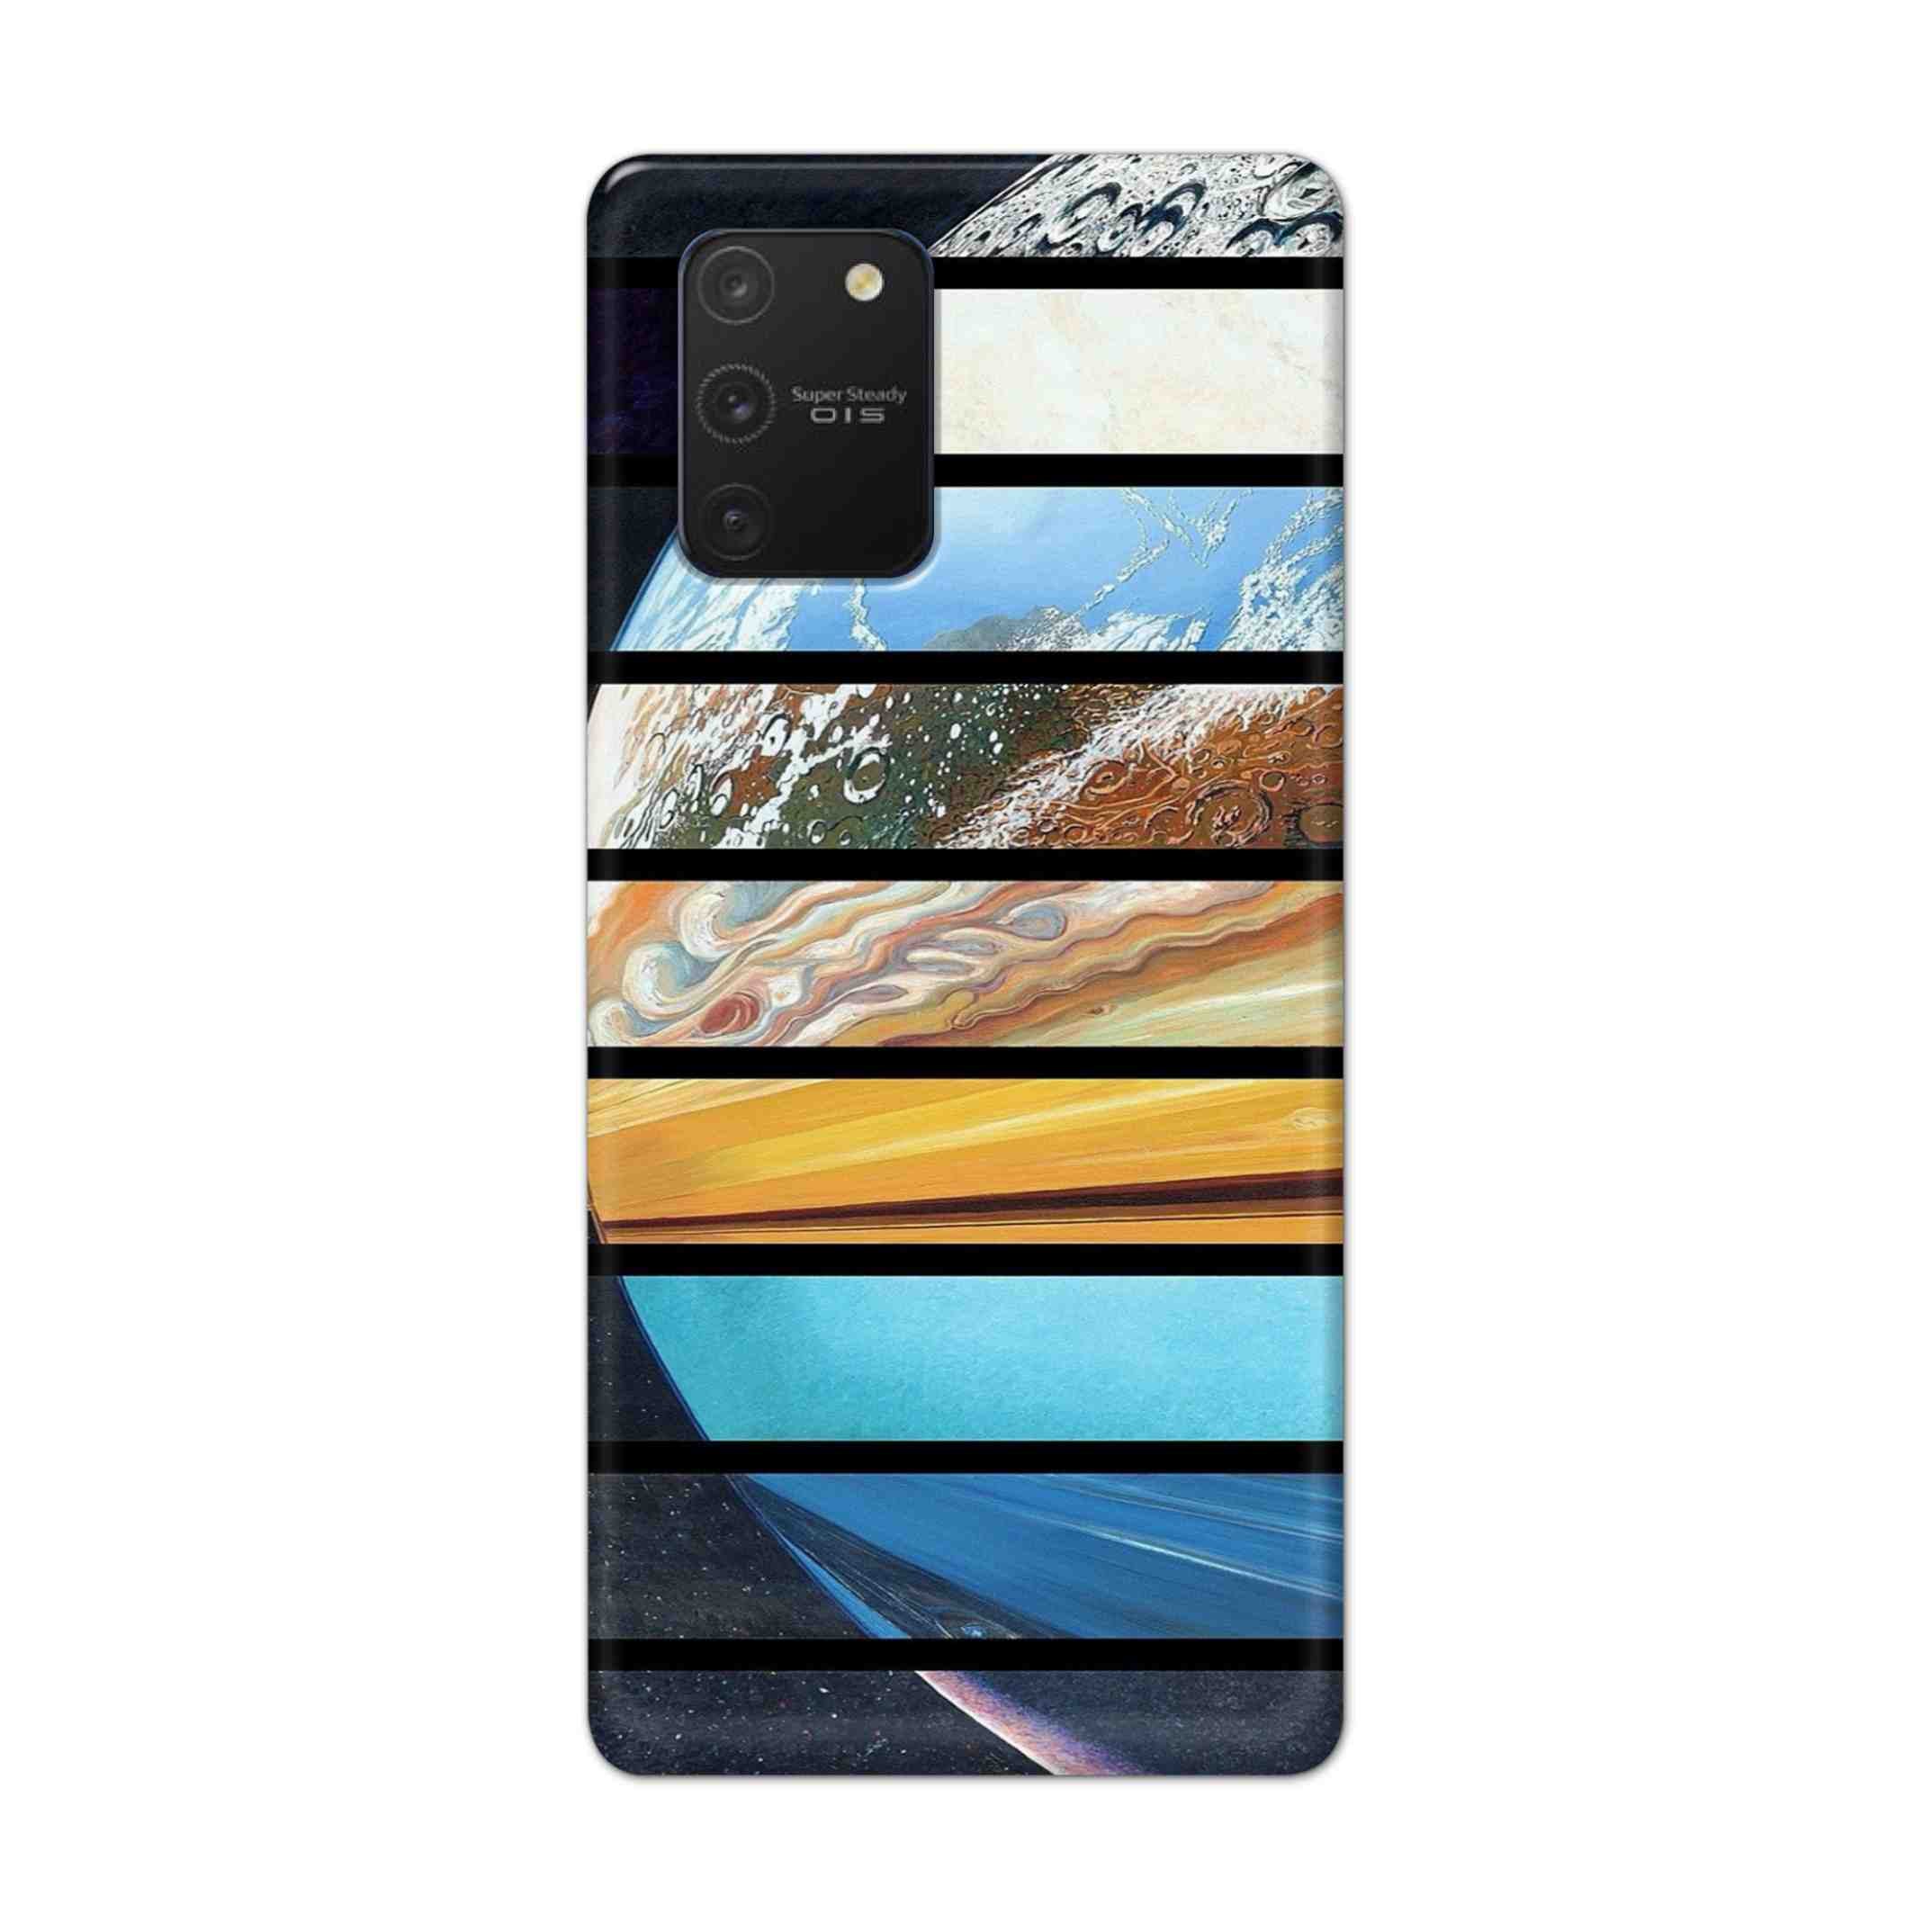 Buy Colourful Earth Hard Back Mobile Phone Case Cover For Samsung Galaxy S10 Lite Online